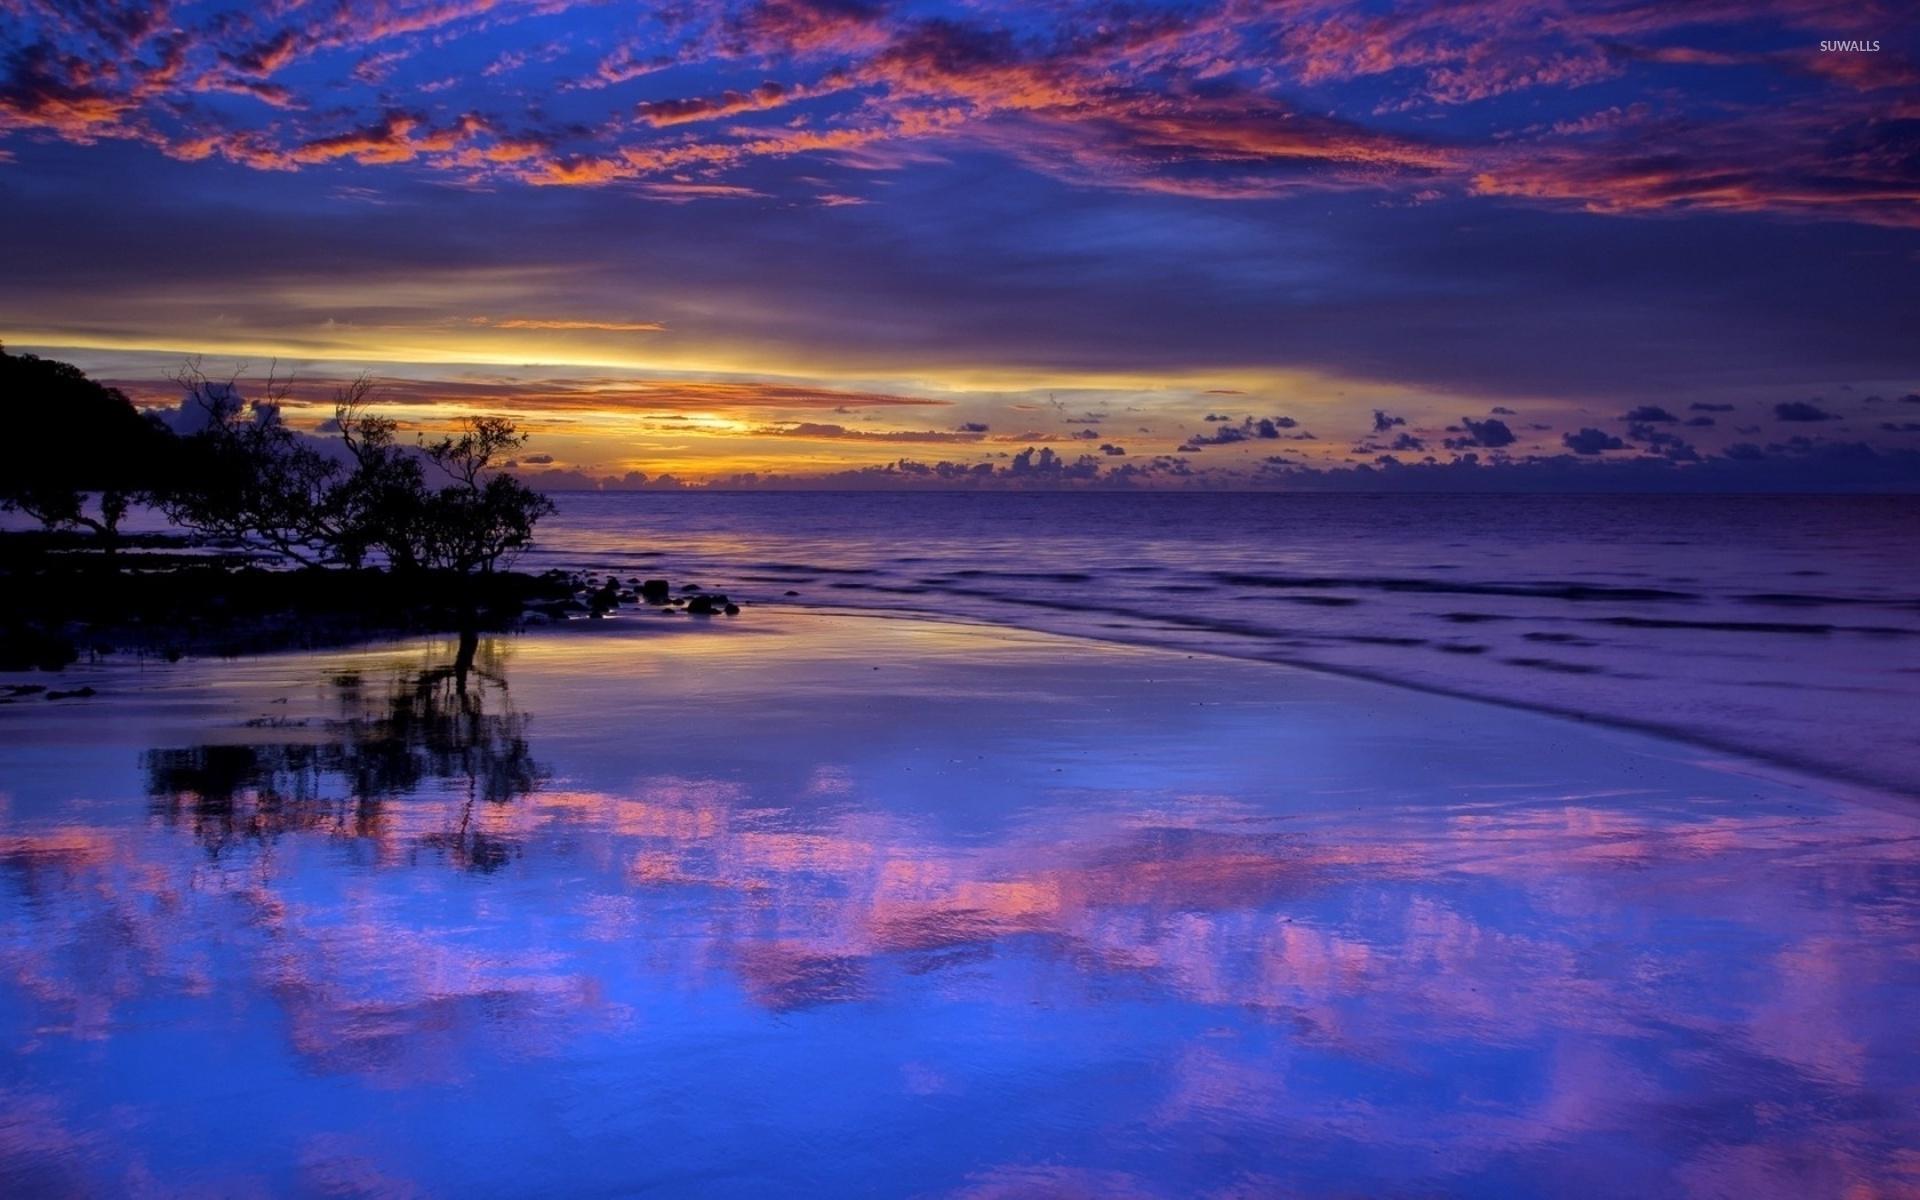 Amazing purple sunset clouds reflected in the wet beach